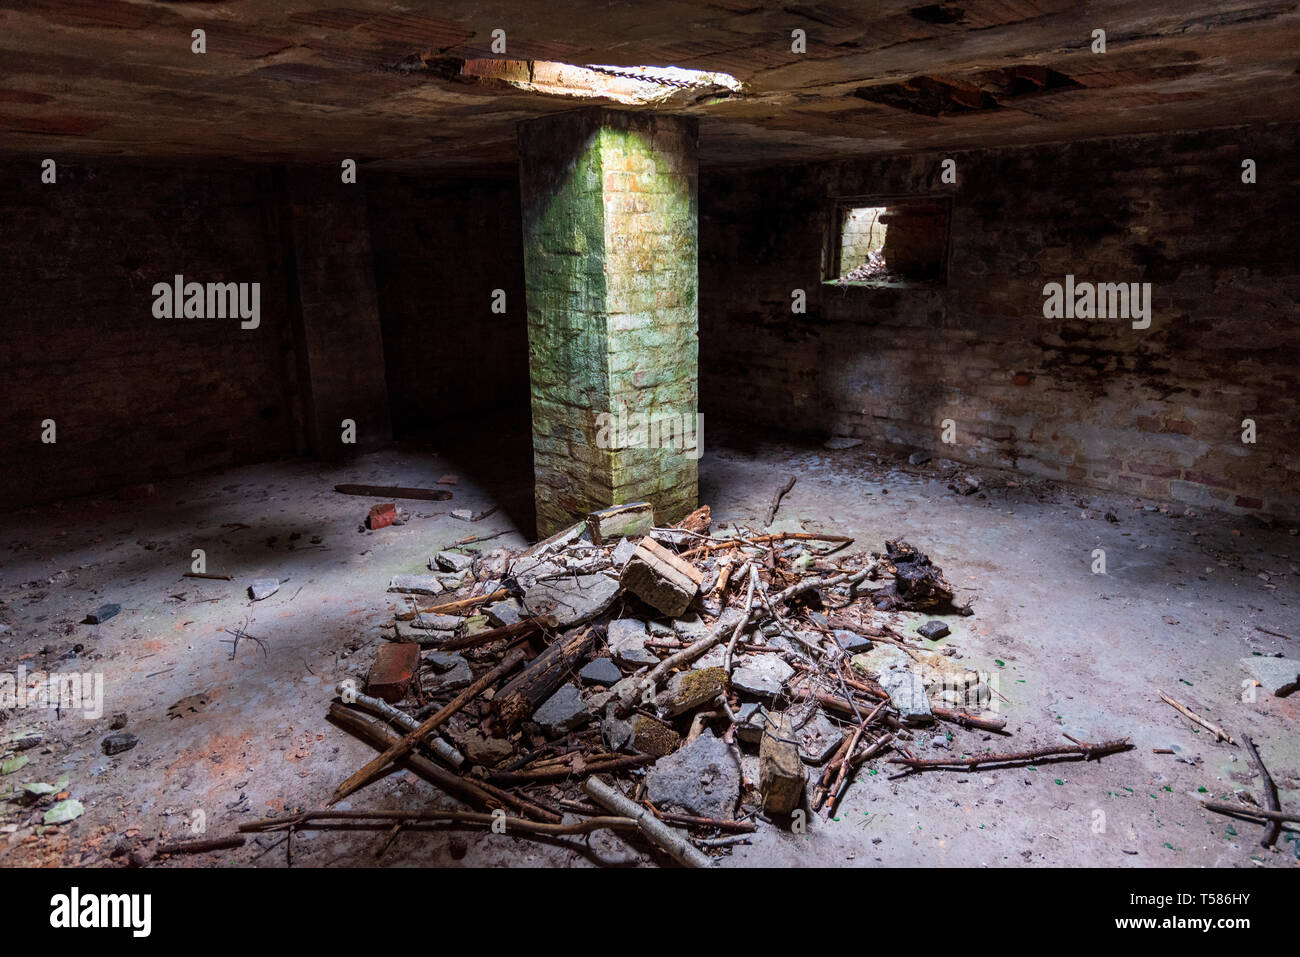 Remains of hospital in Stalag Luft III Great Escape POW Camp, Zagan, Poland Stock Photo